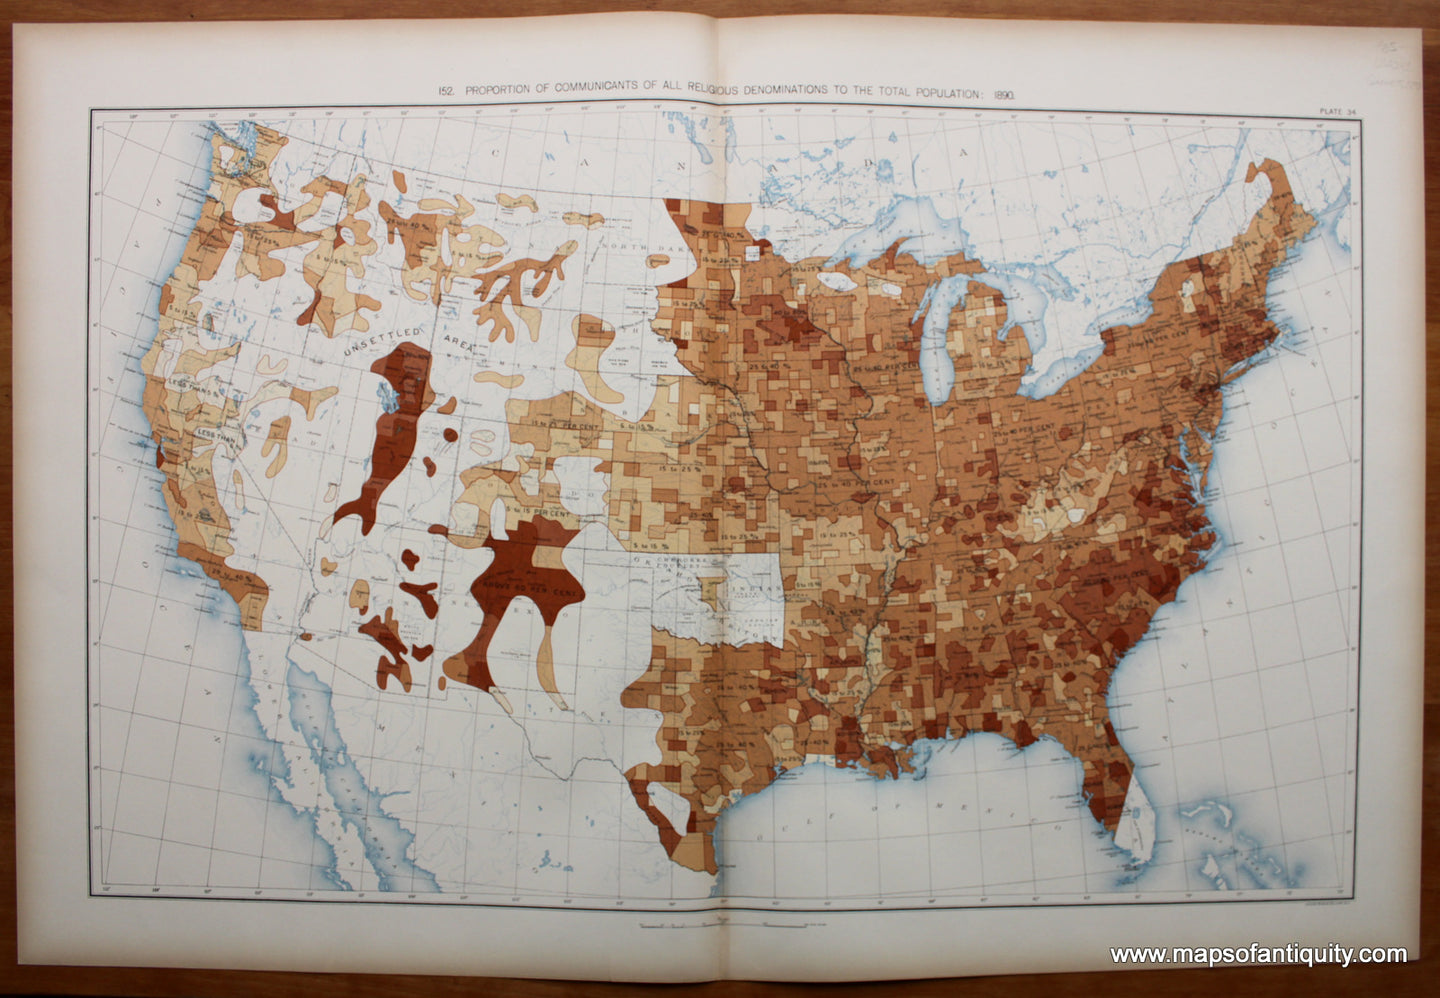 Antique-Printed-Color-Map-Proportion-of-Communicants-of-All-Religious-Denomination-to-the-Total-Population:-1890-United-States-United-States-General-1898-Gannett-Maps-Of-Antiquity